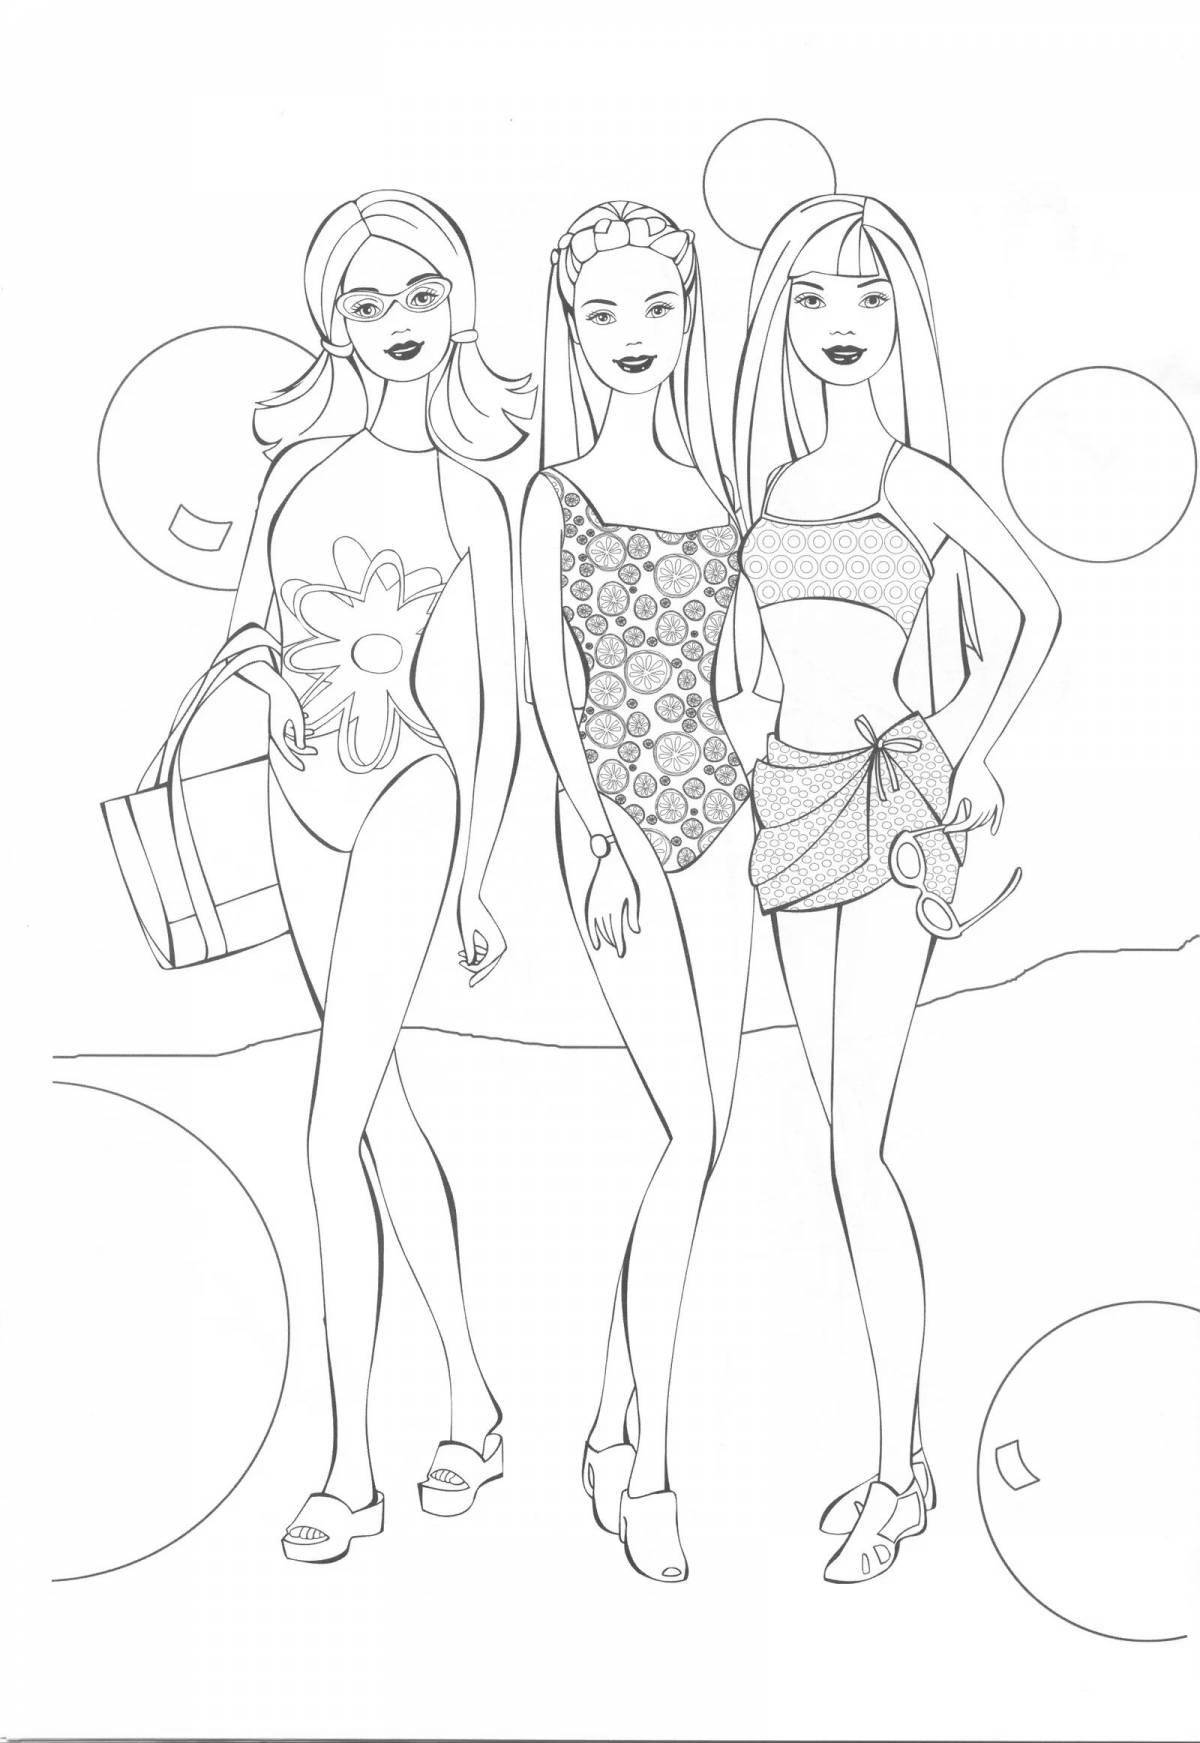 Coloring page dazzling barbie in a bathing suit